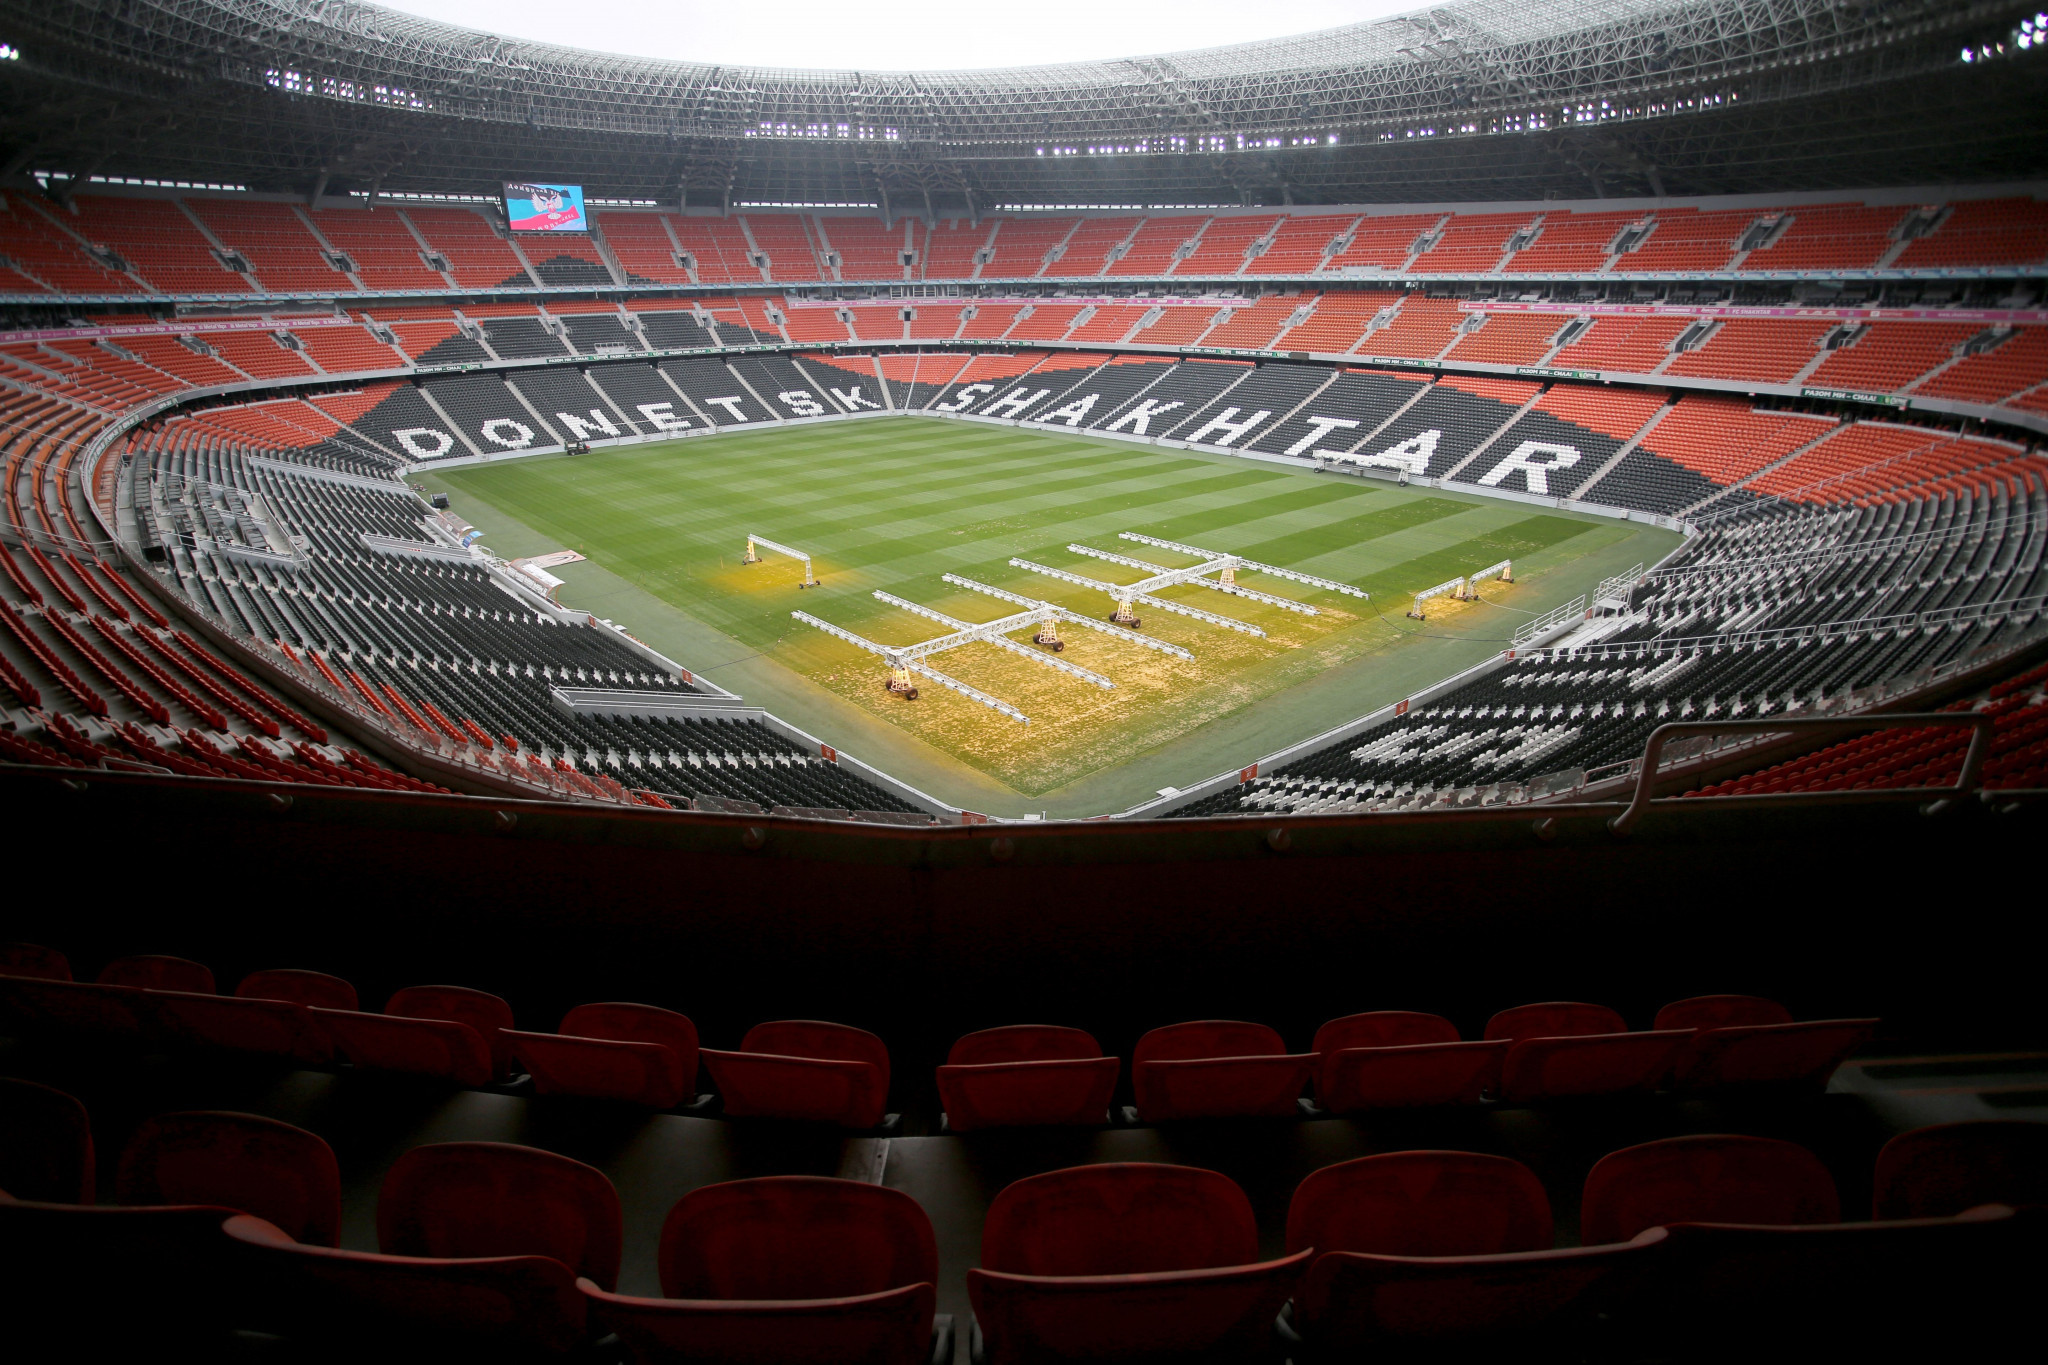 The Donbass Arena in Donetsk, which holds more than 50,000 spectators, has been unused since 2014 ©Getty Images